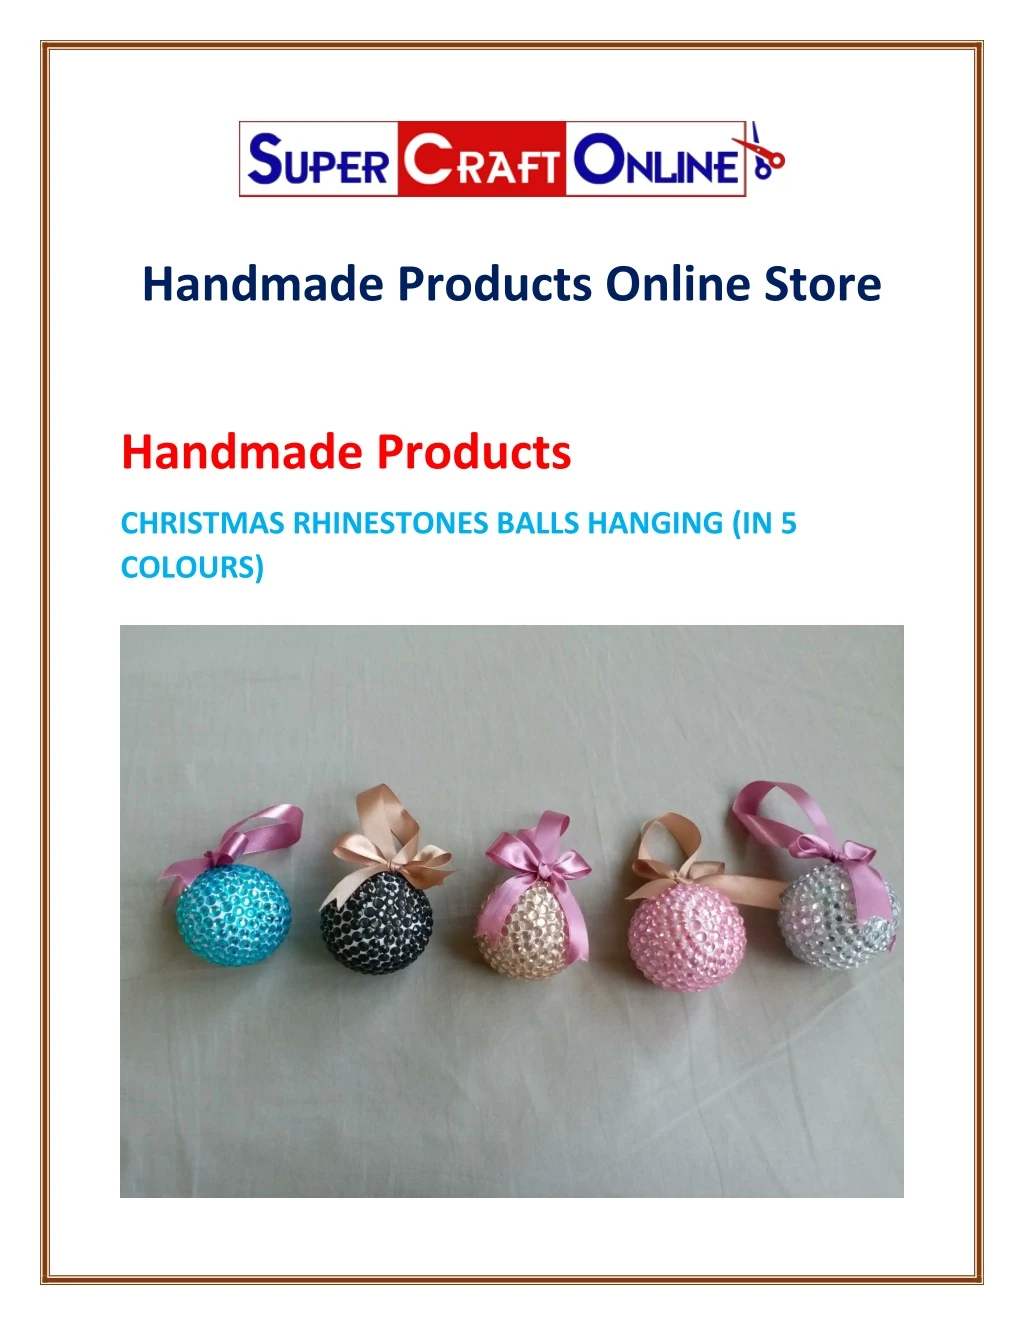 handmade products online store